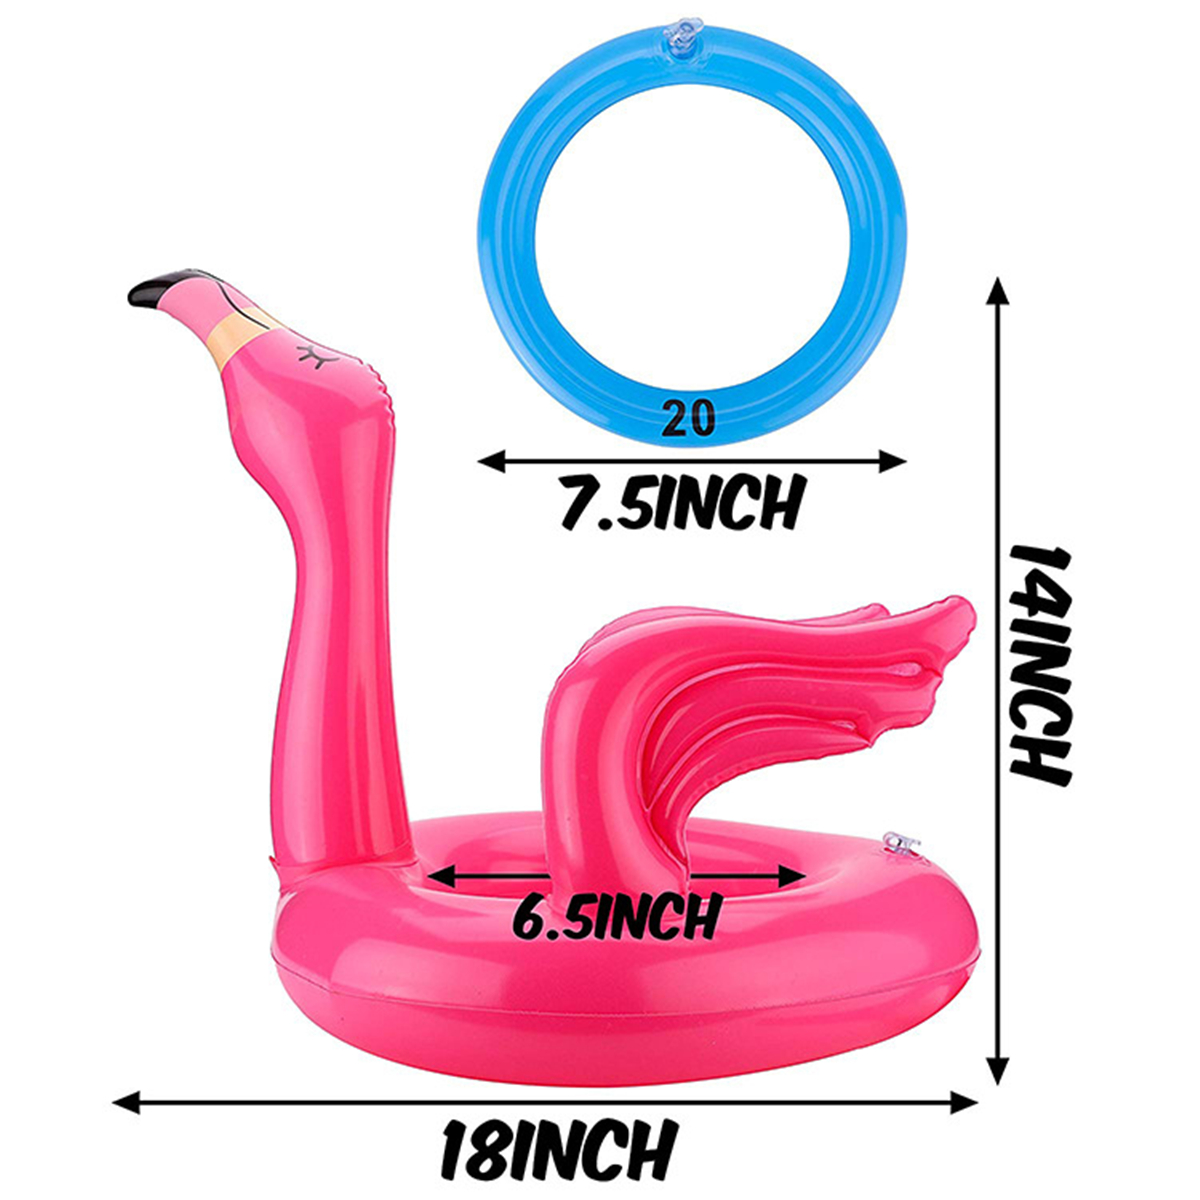 Inflatable-Flamingo-Ring-Toss-Game-For-Family-Party-Pool-Garden-Throwing-Toys-1626091-3